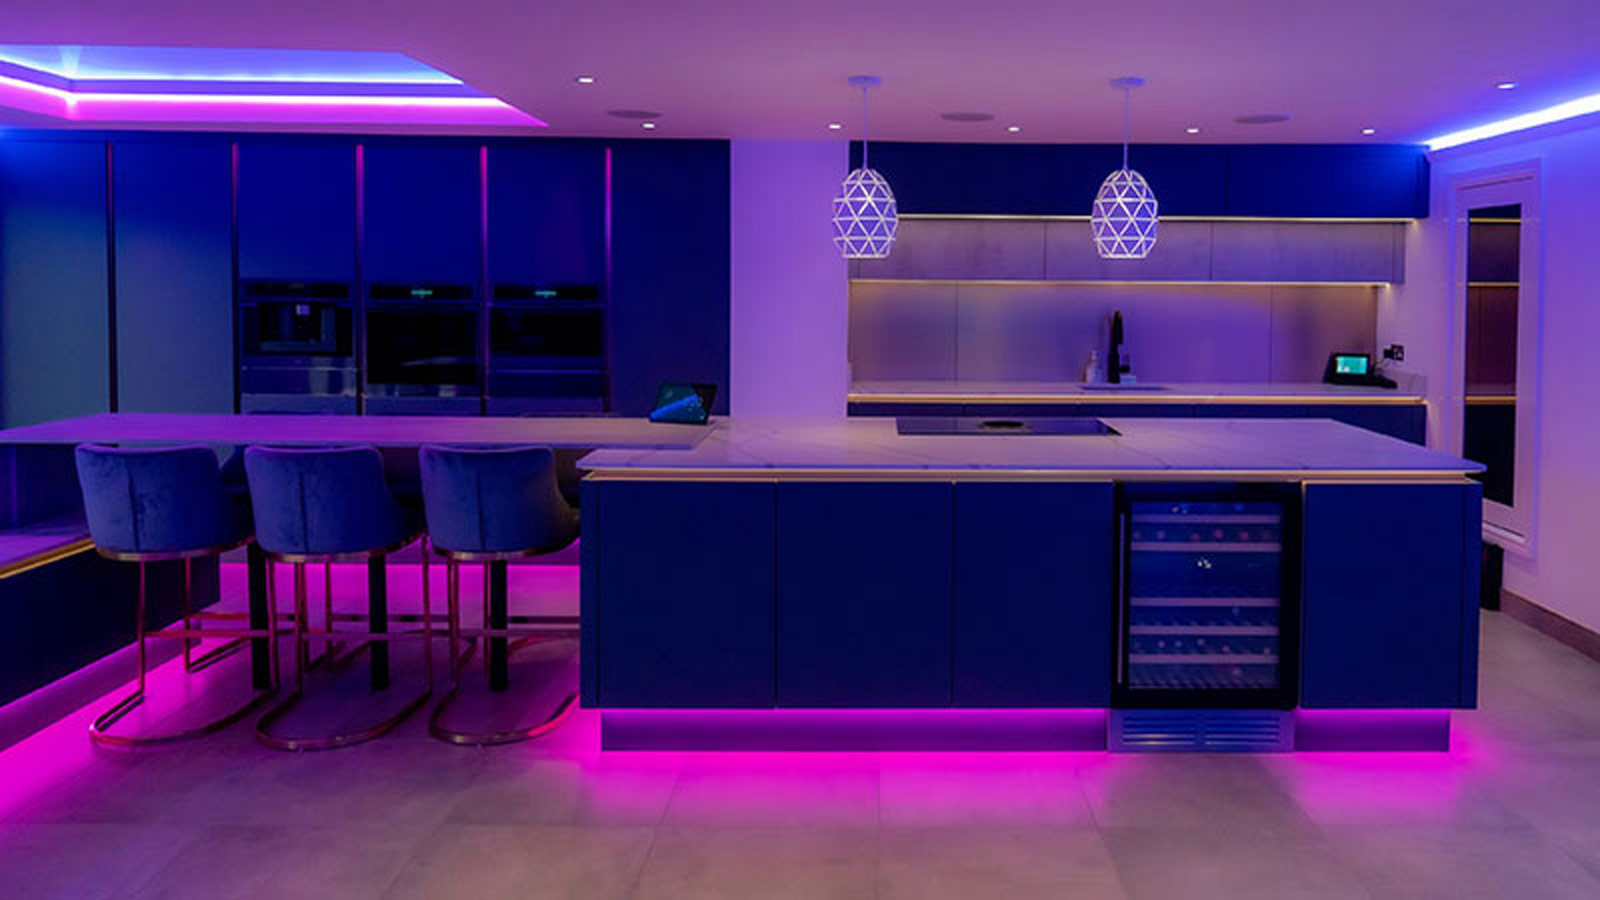 A modern luxury kitchen with a home bar area, a wine fridge and black lights